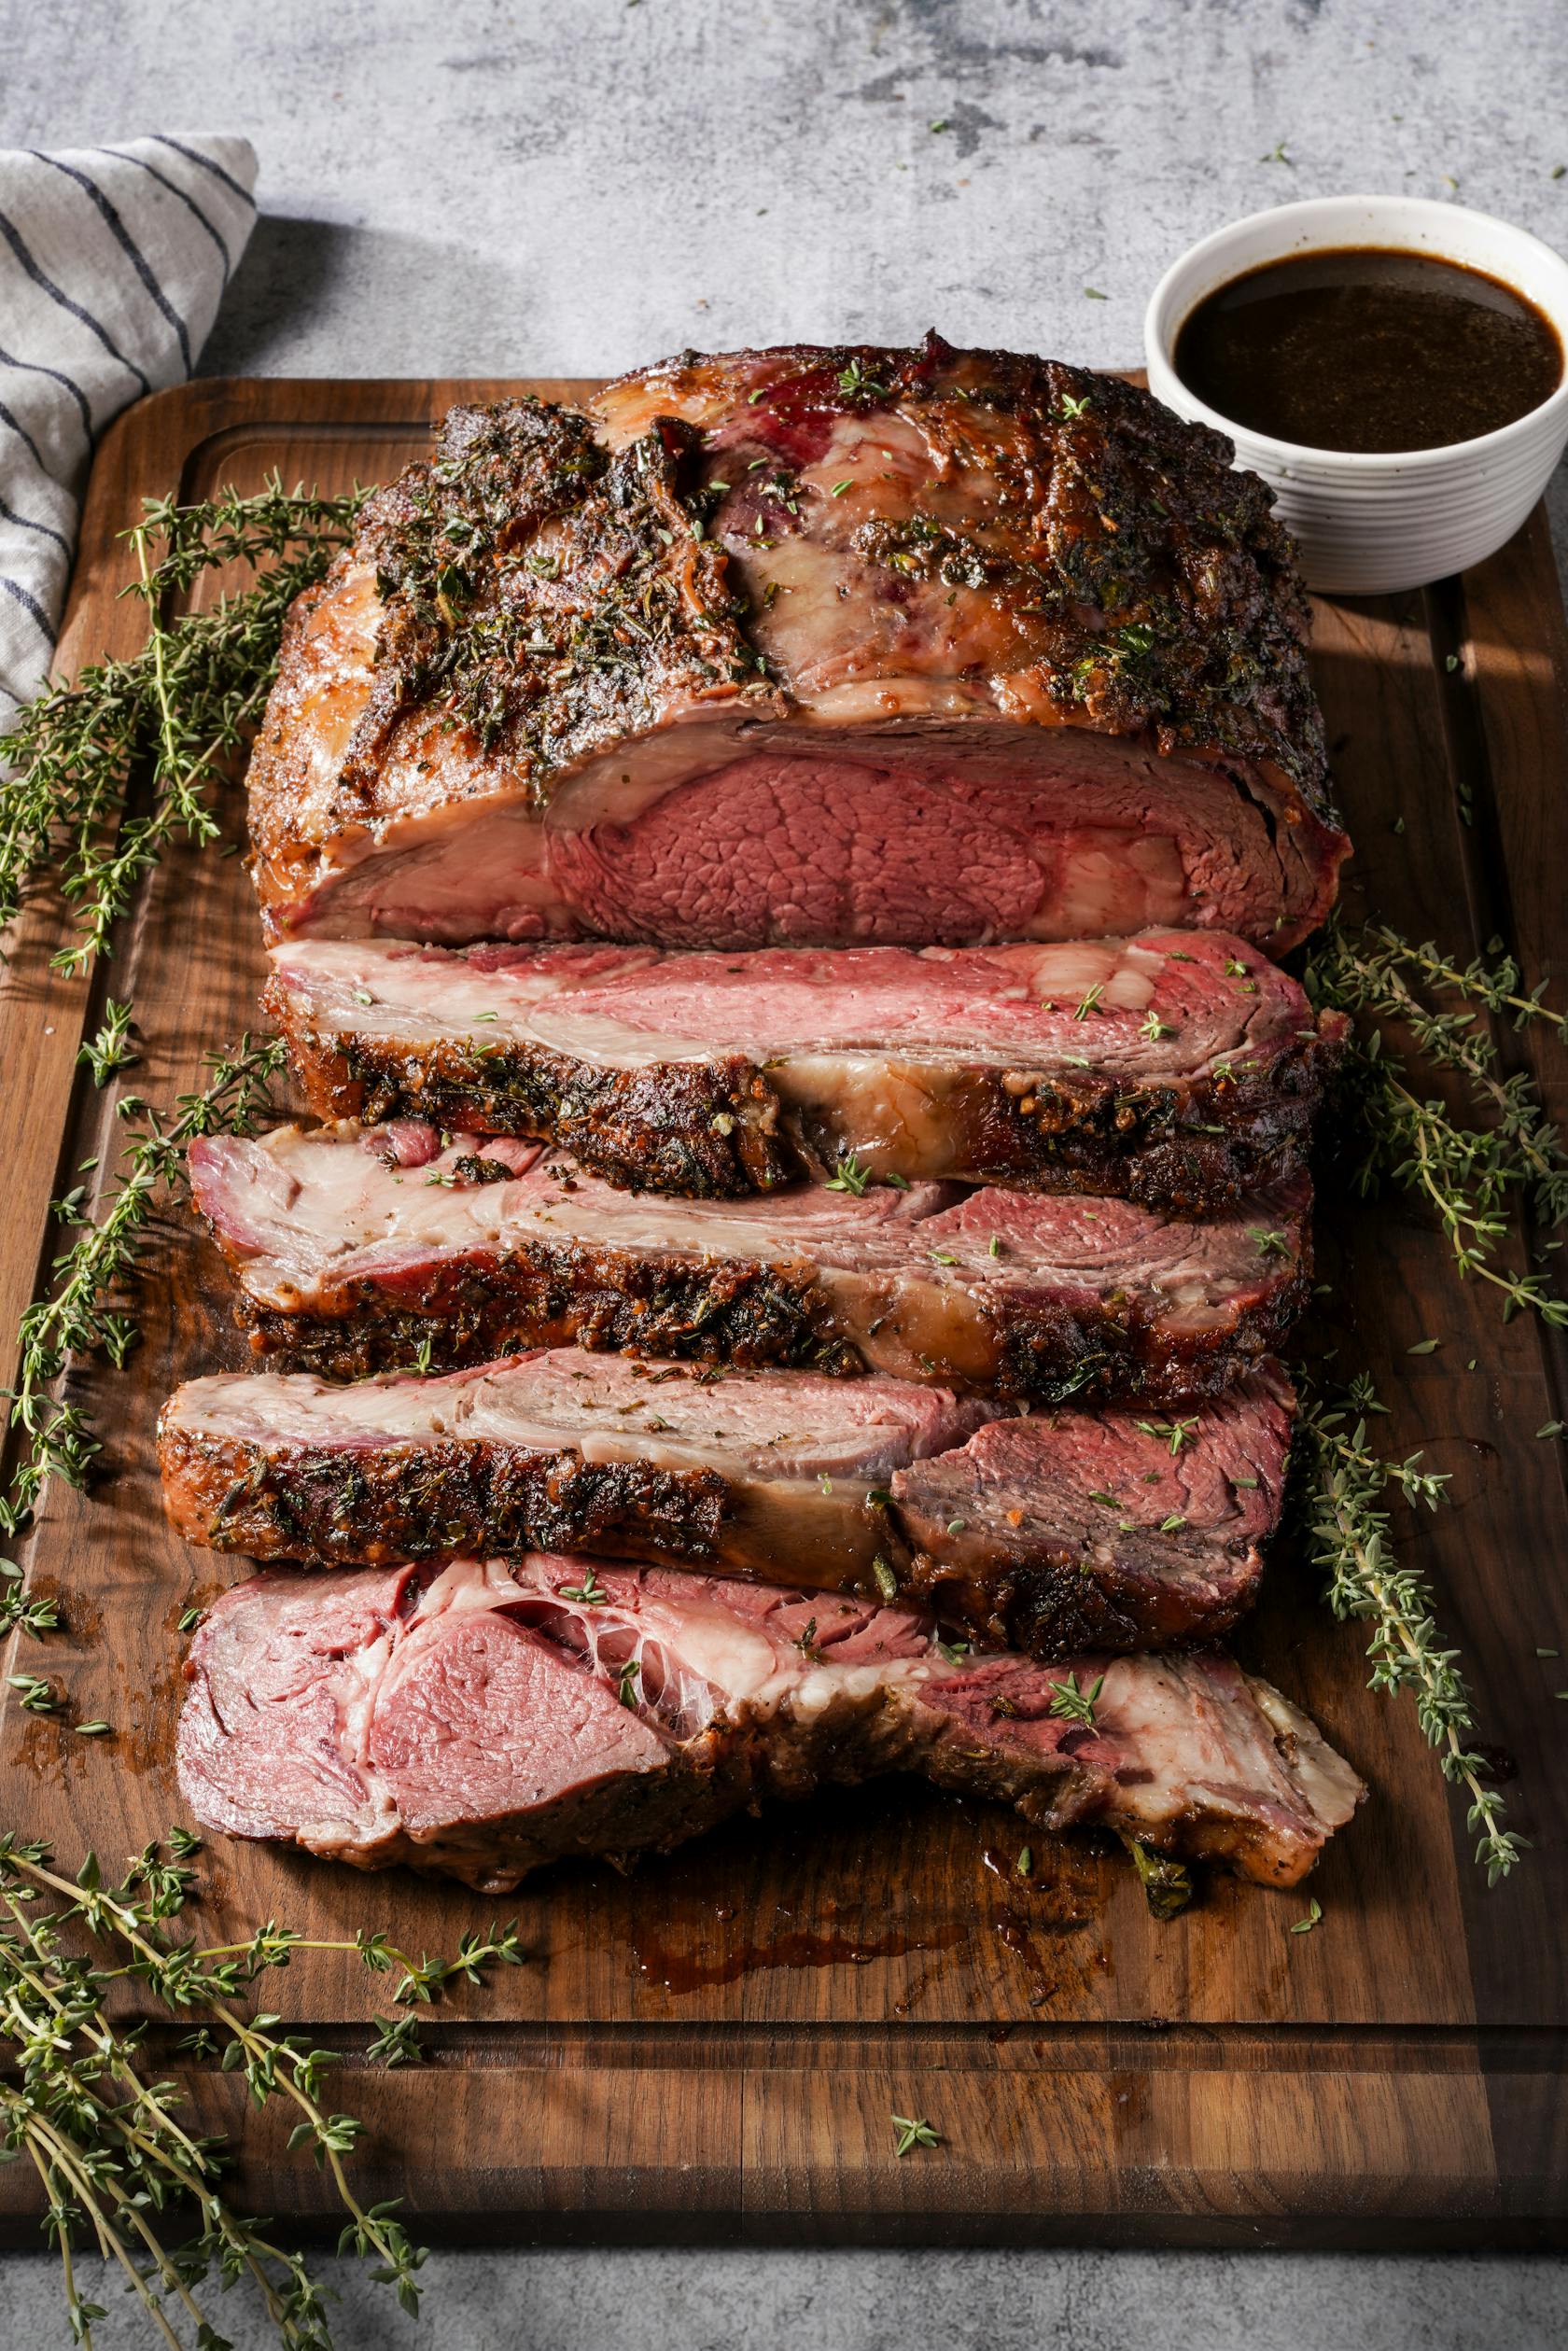 Herb-Crusted Prime Rib with Au Jus